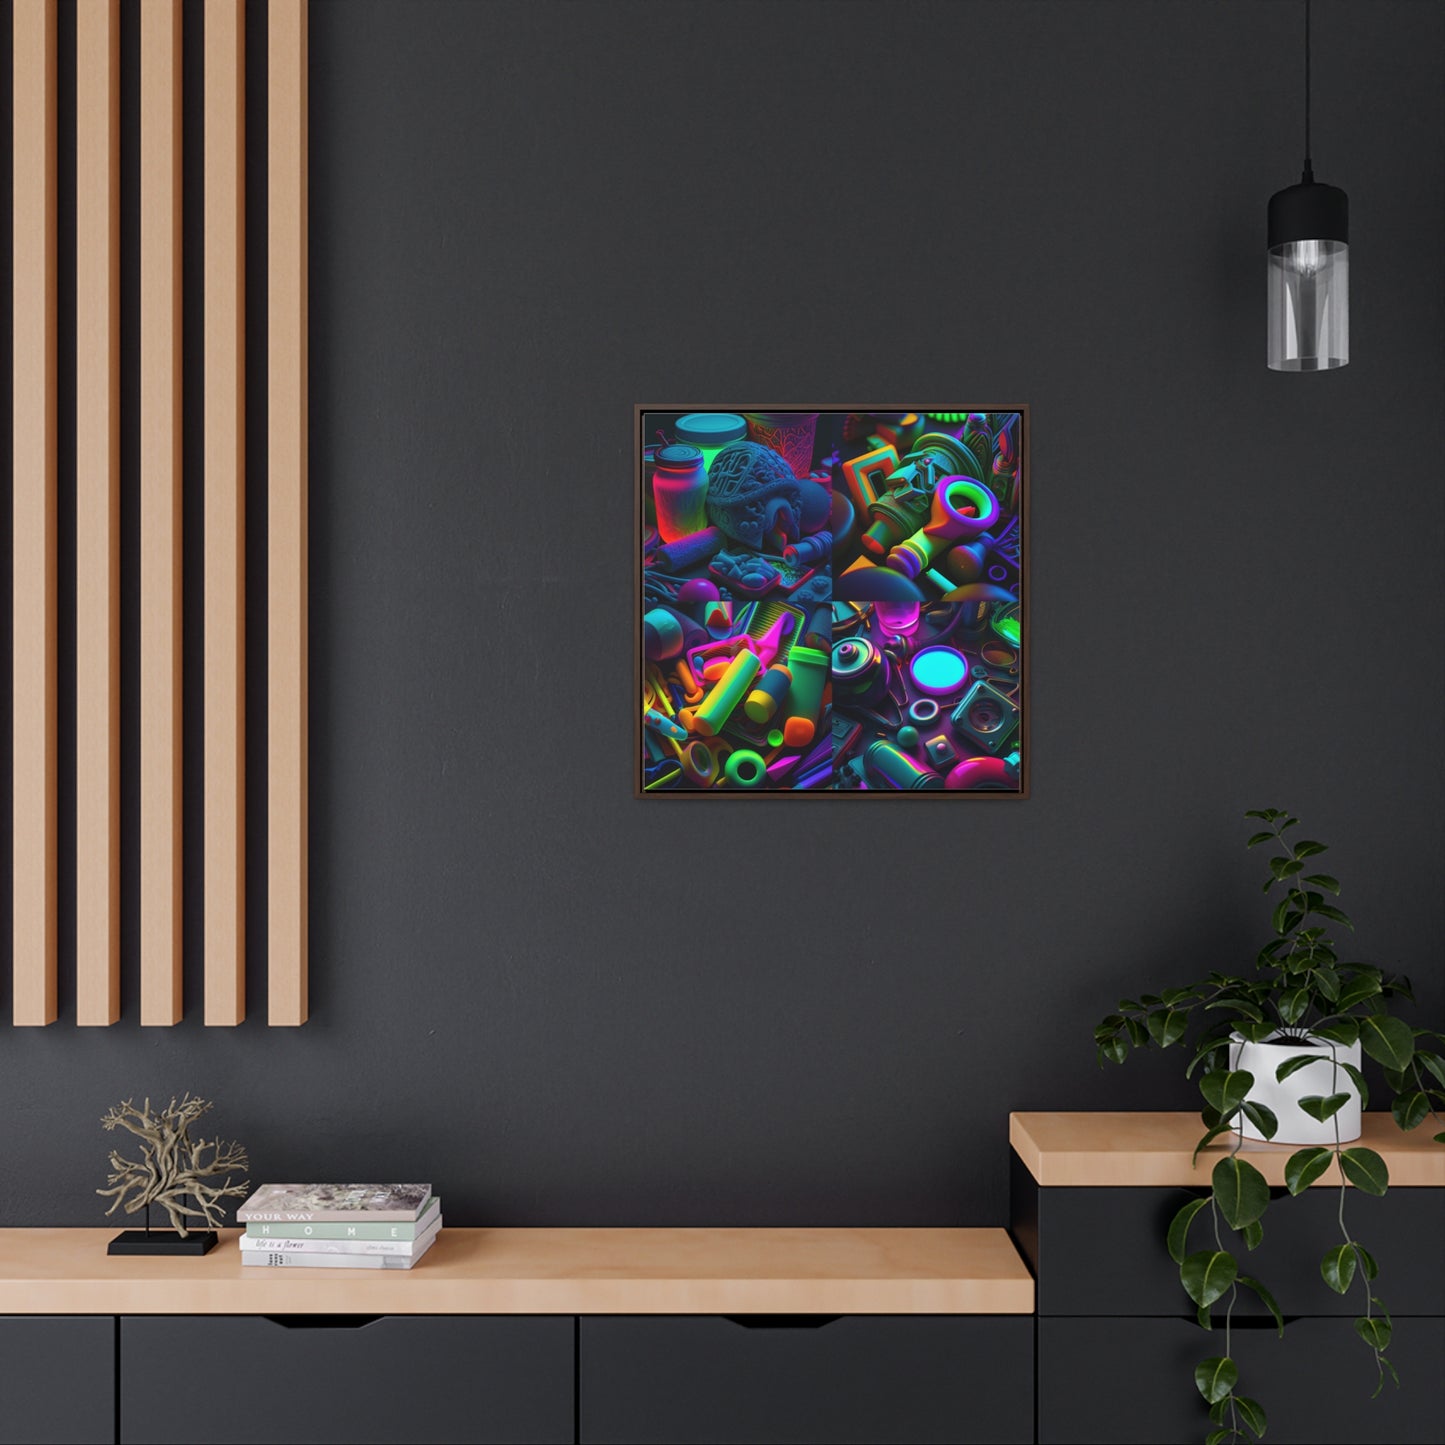 Gallery Canvas Wraps, Square Frame Neon Glow